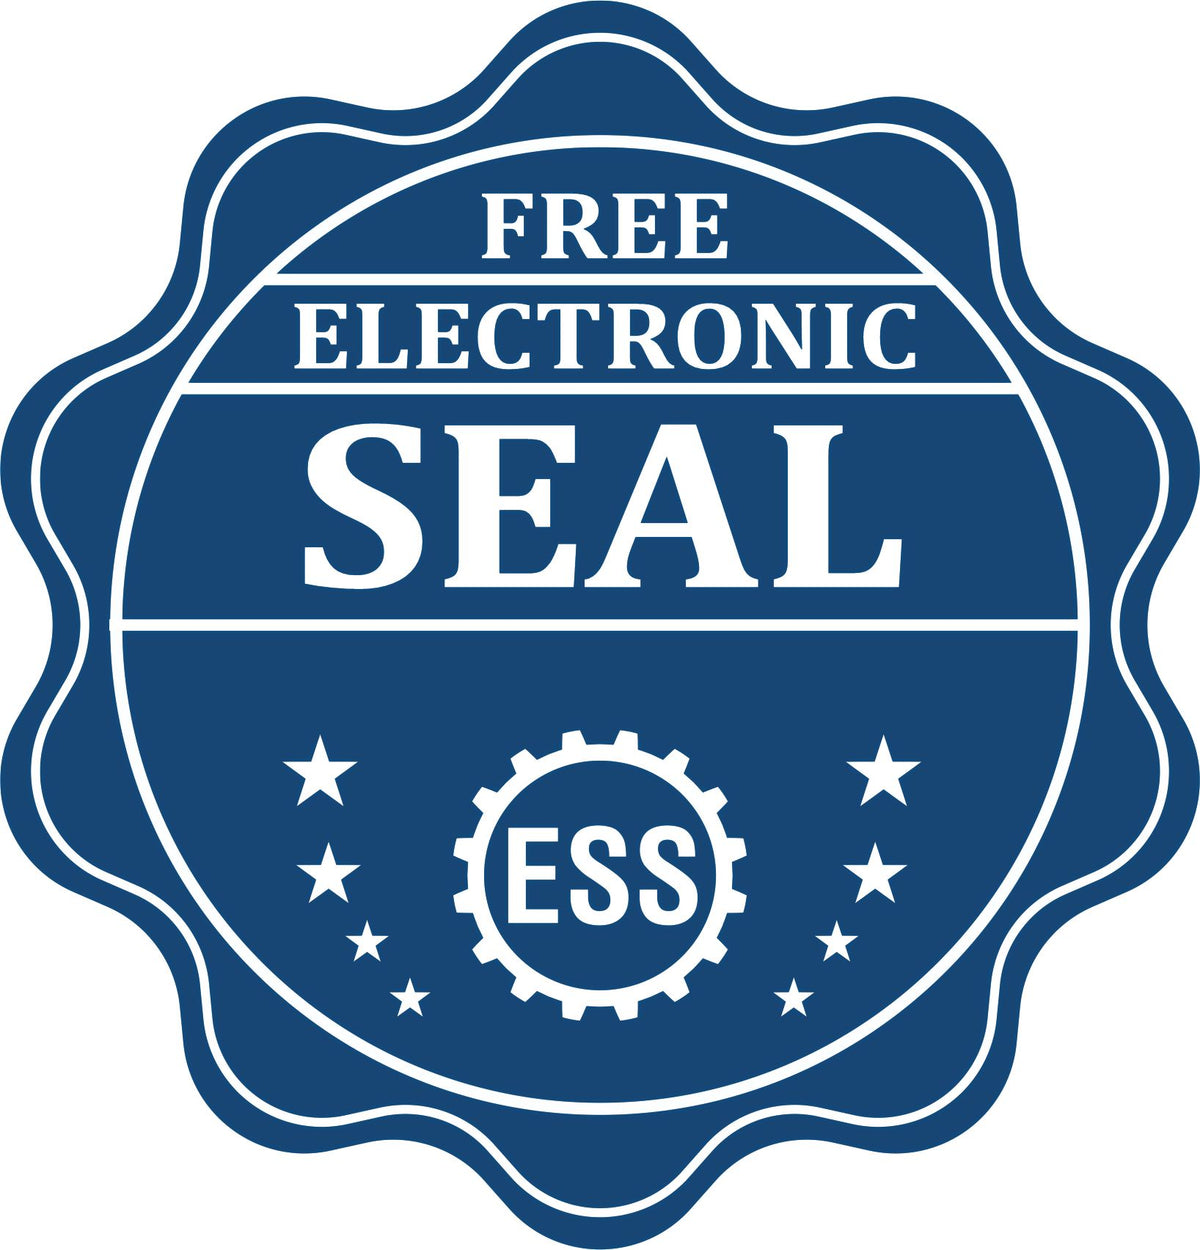 A badge showing a free electronic seal for the MaxLight Premium Pre-Inked Delaware State Seal Notarial Stamp with stars and the ESS gear on the emblem.